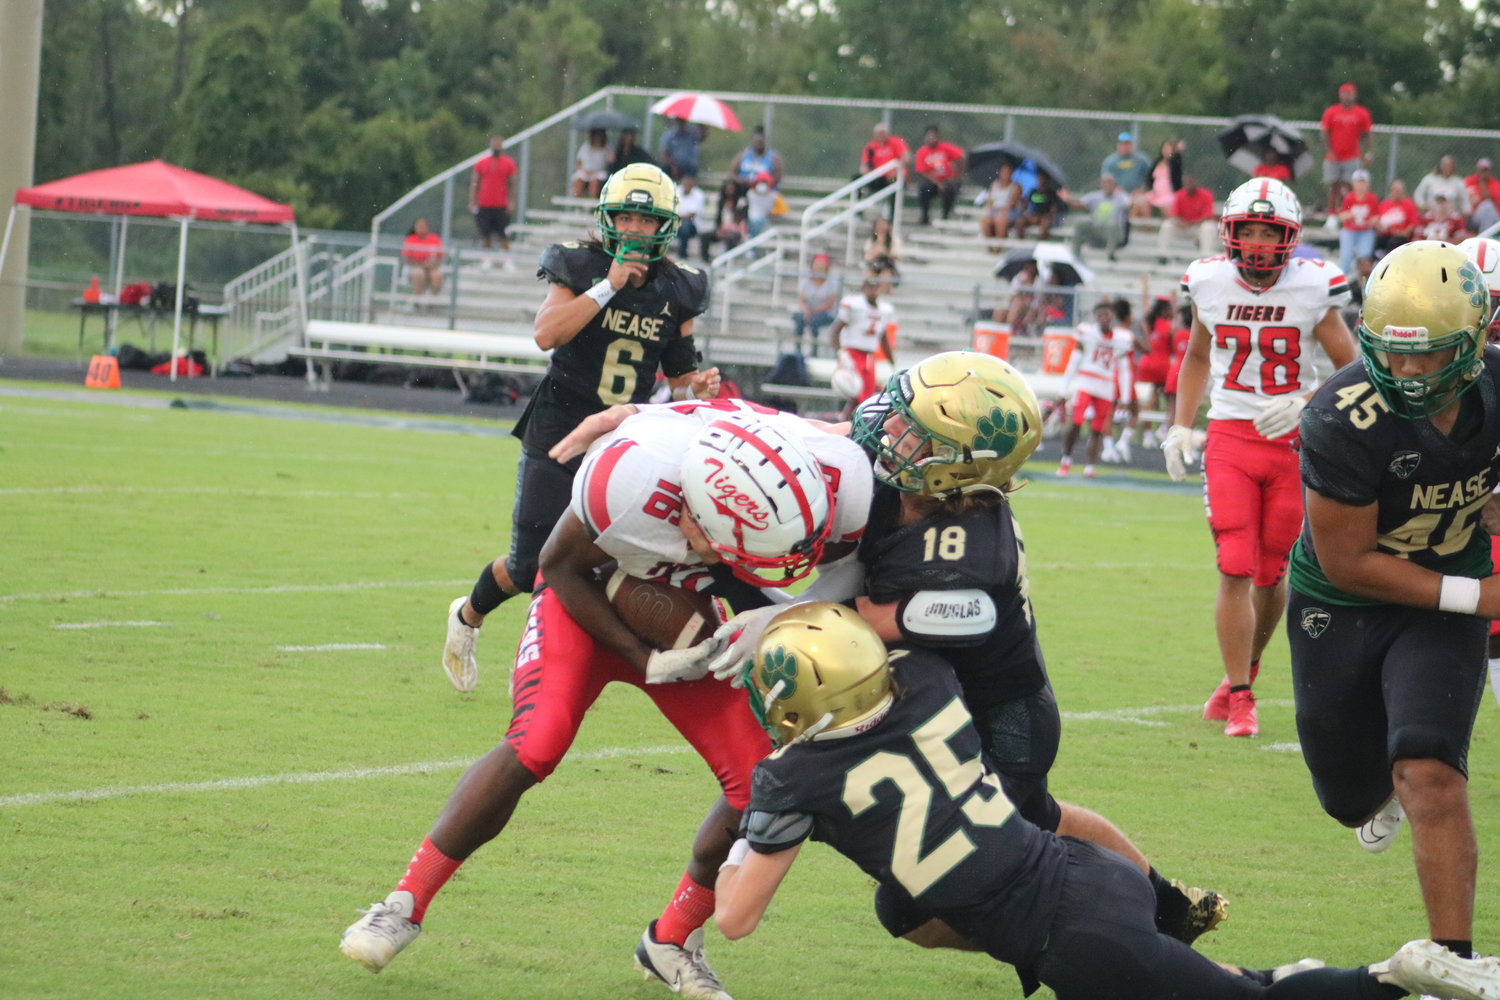 Nease’s defense did an excellent job of swarming to the ball in the season opener.